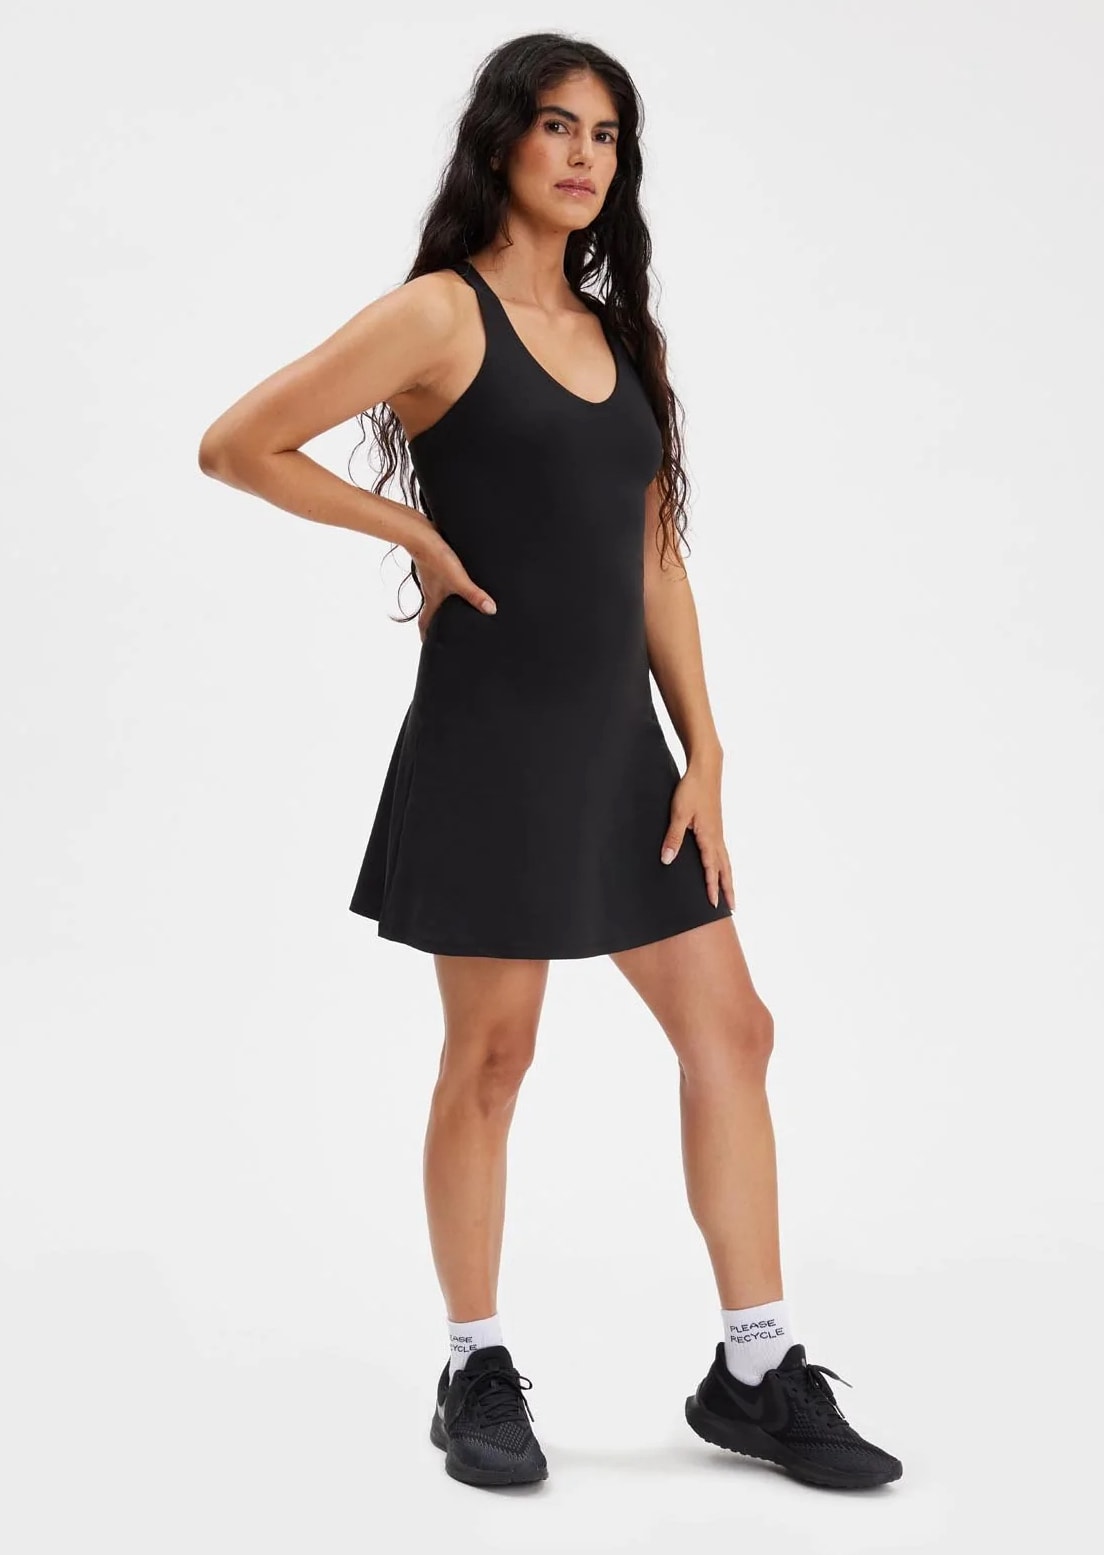 Woman in black sleeveless v-neck athletic dress and black sneakers 